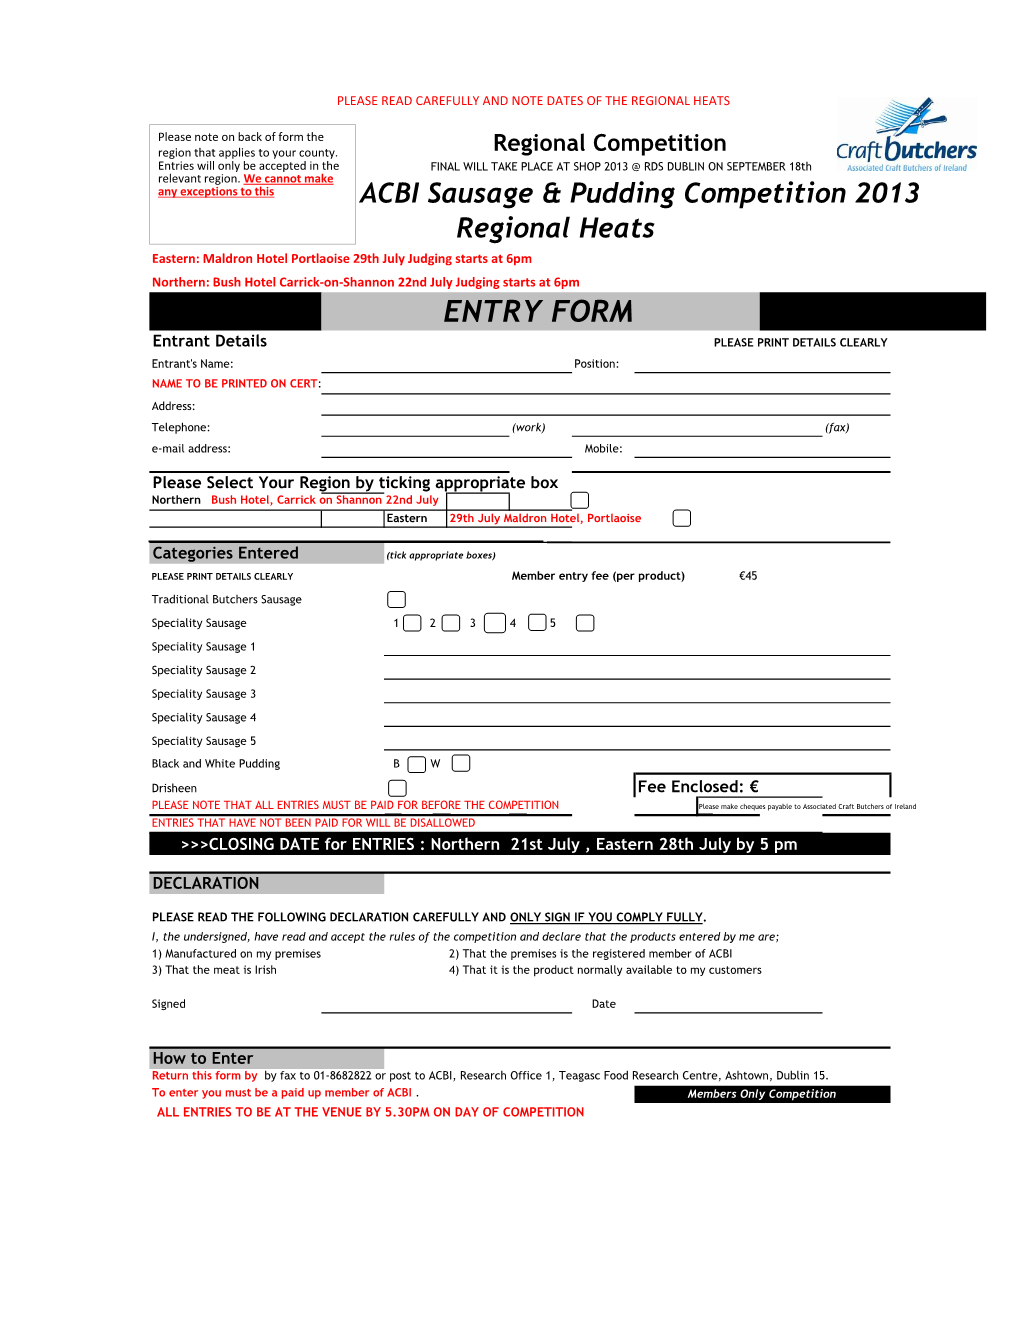 ENTRY FORM Entrant Details PLEASE PRINT DETAILS CLEARLY Entrant's Name: Position: NAME to BE PRINTED on CERT: Address: Telephone: (Work) (Fax) E-Mail Address: Mobile